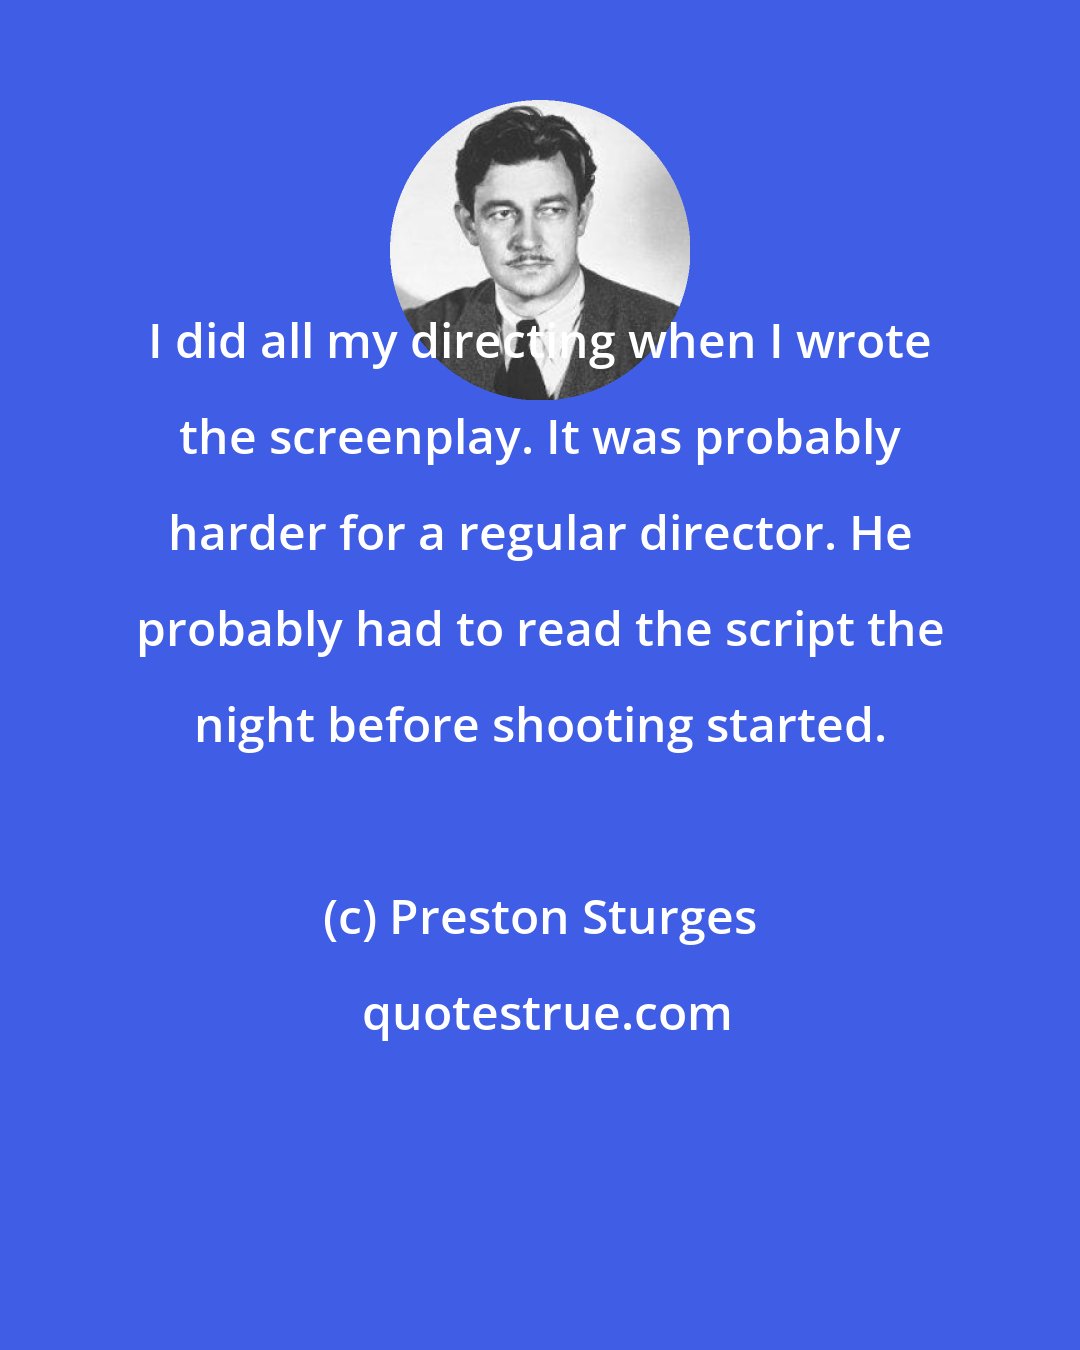 Preston Sturges: I did all my directing when I wrote the screenplay. It was probably harder for a regular director. He probably had to read the script the night before shooting started.